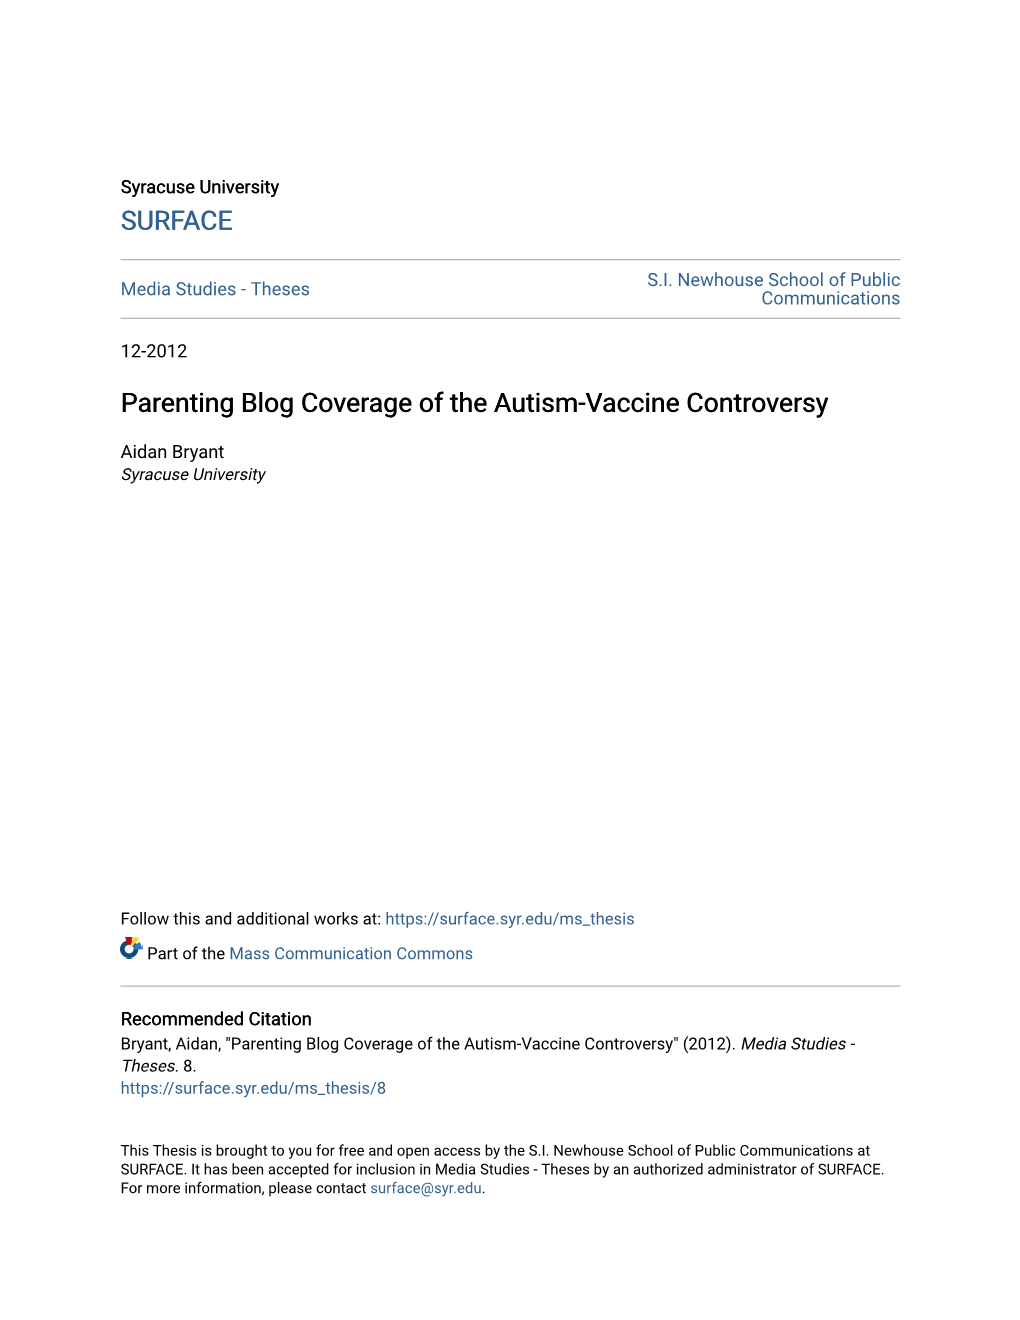 Parenting Blog Coverage of the Autism-Vaccine Controversy